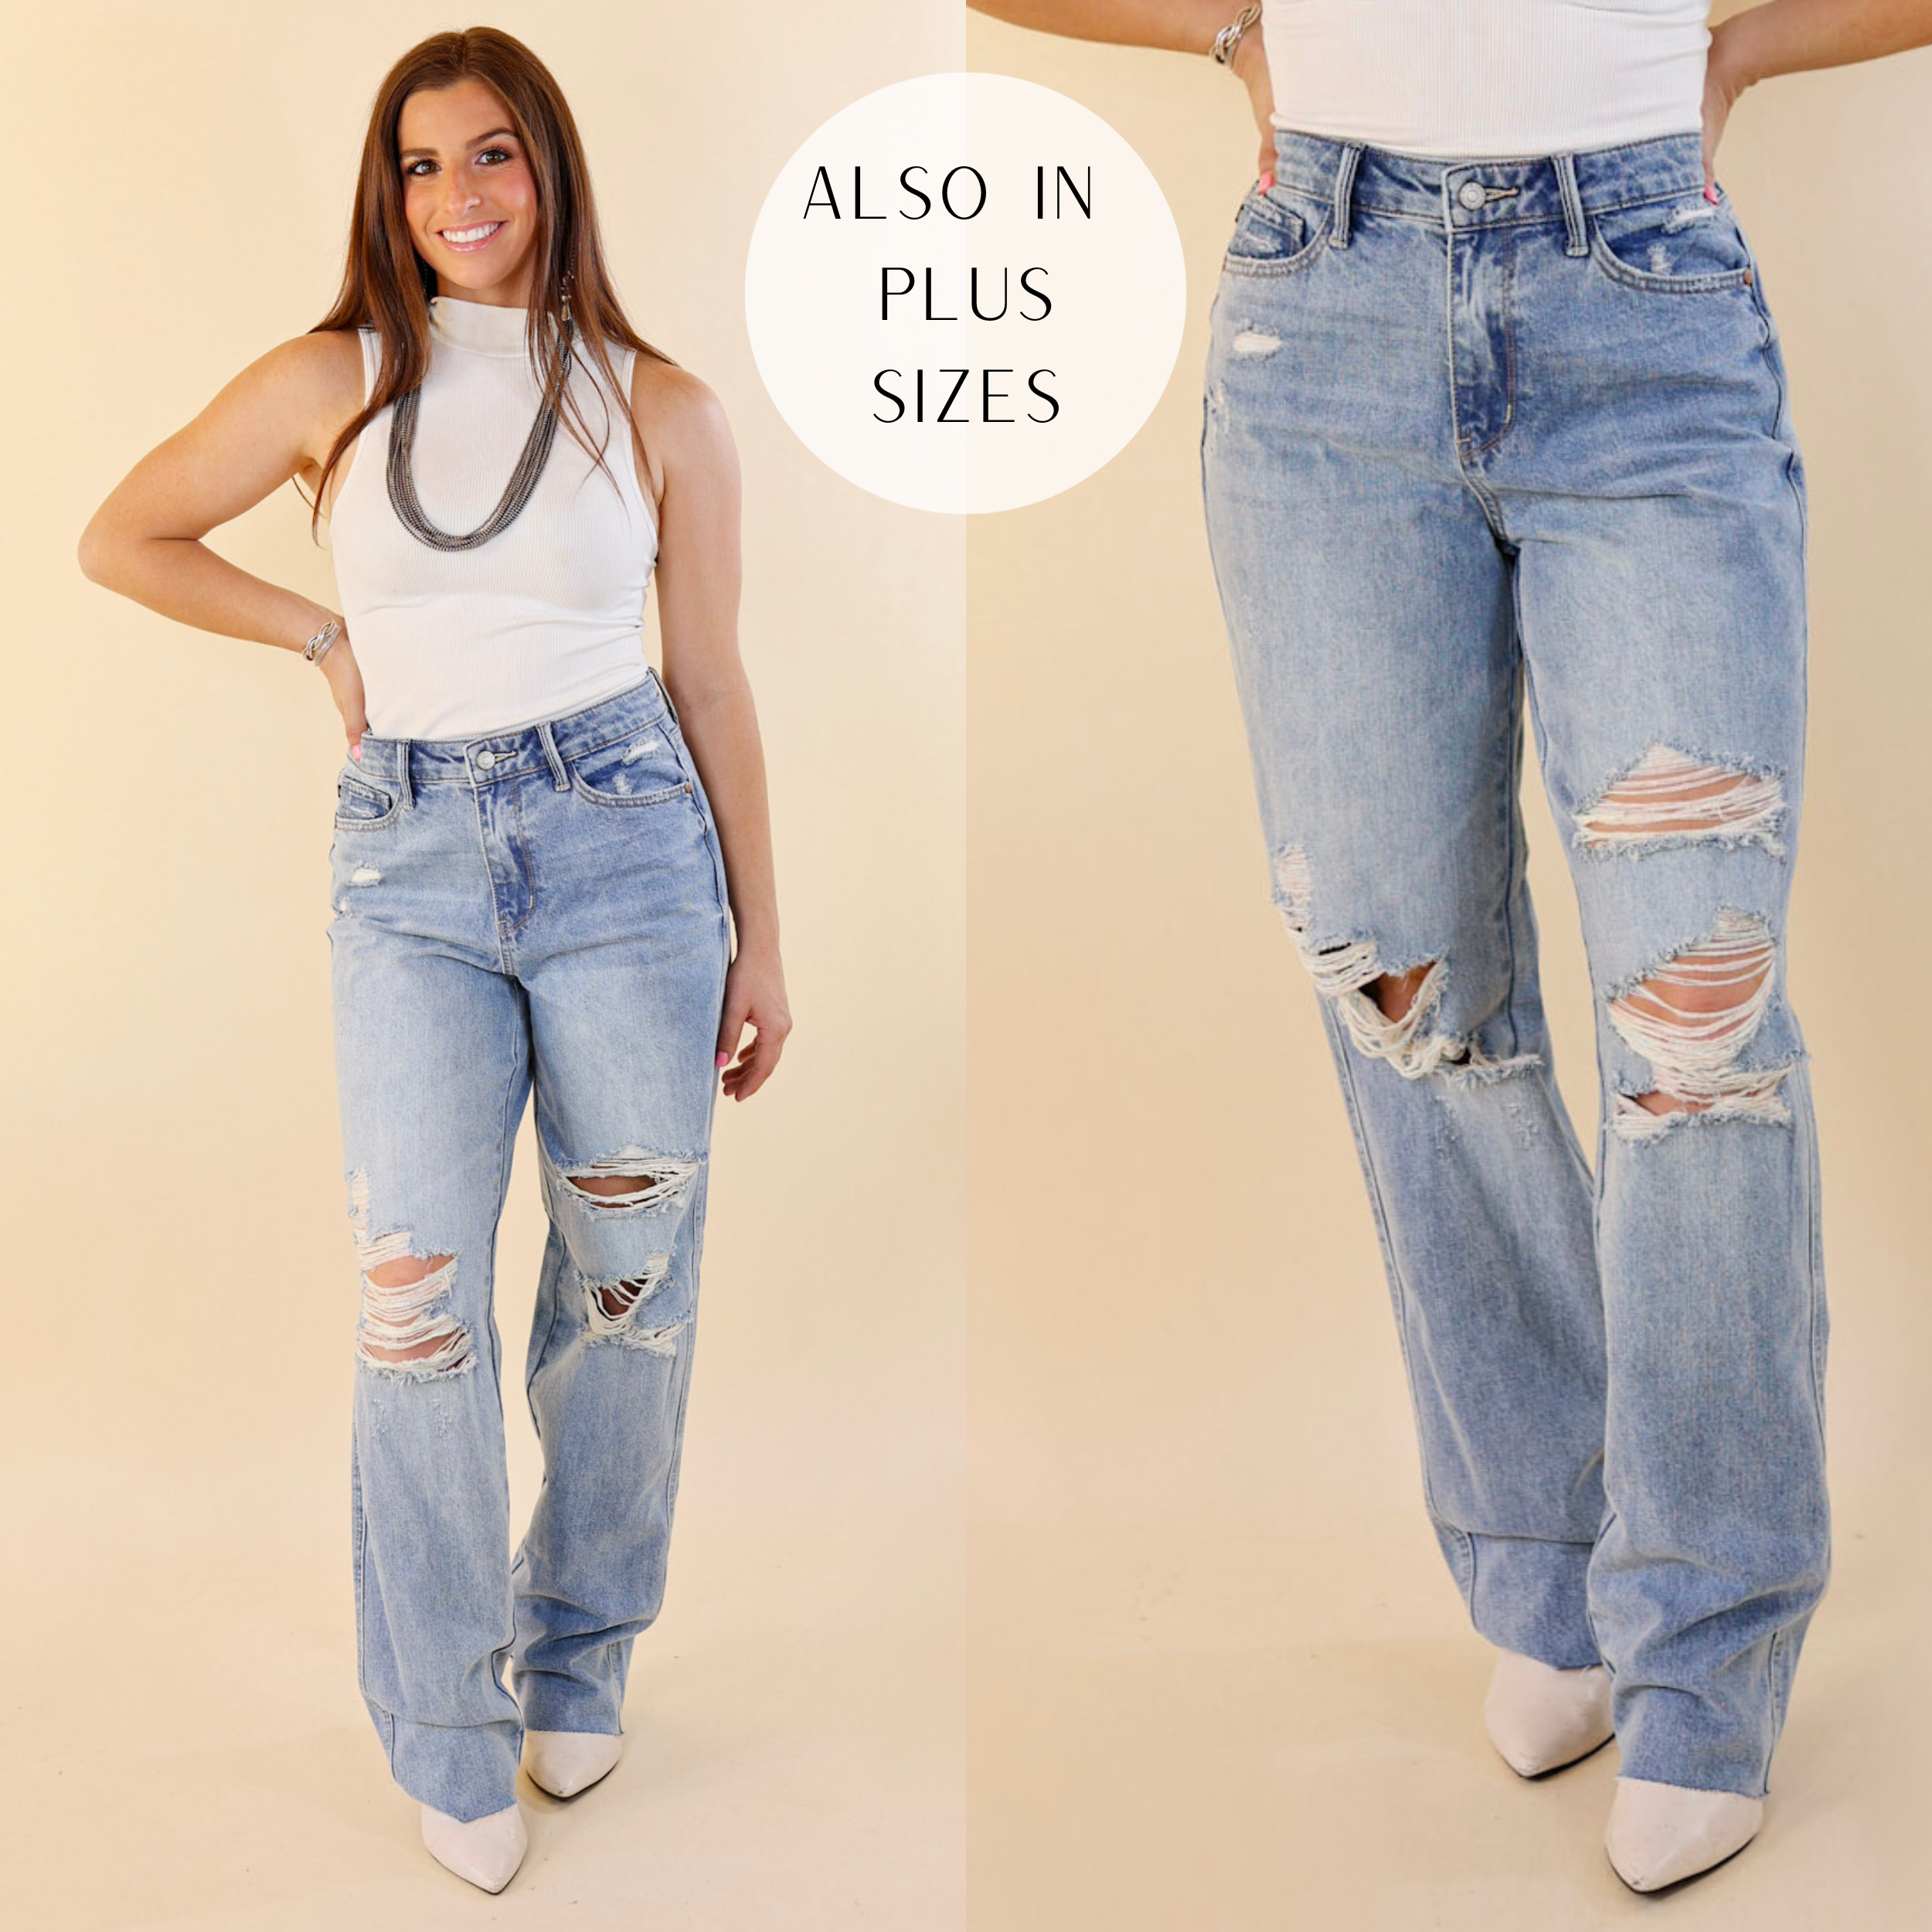 Model is wearing a pair of light wash jeans with lots of distressing. Model has these jeans paired with a white tank top and silver jewerly